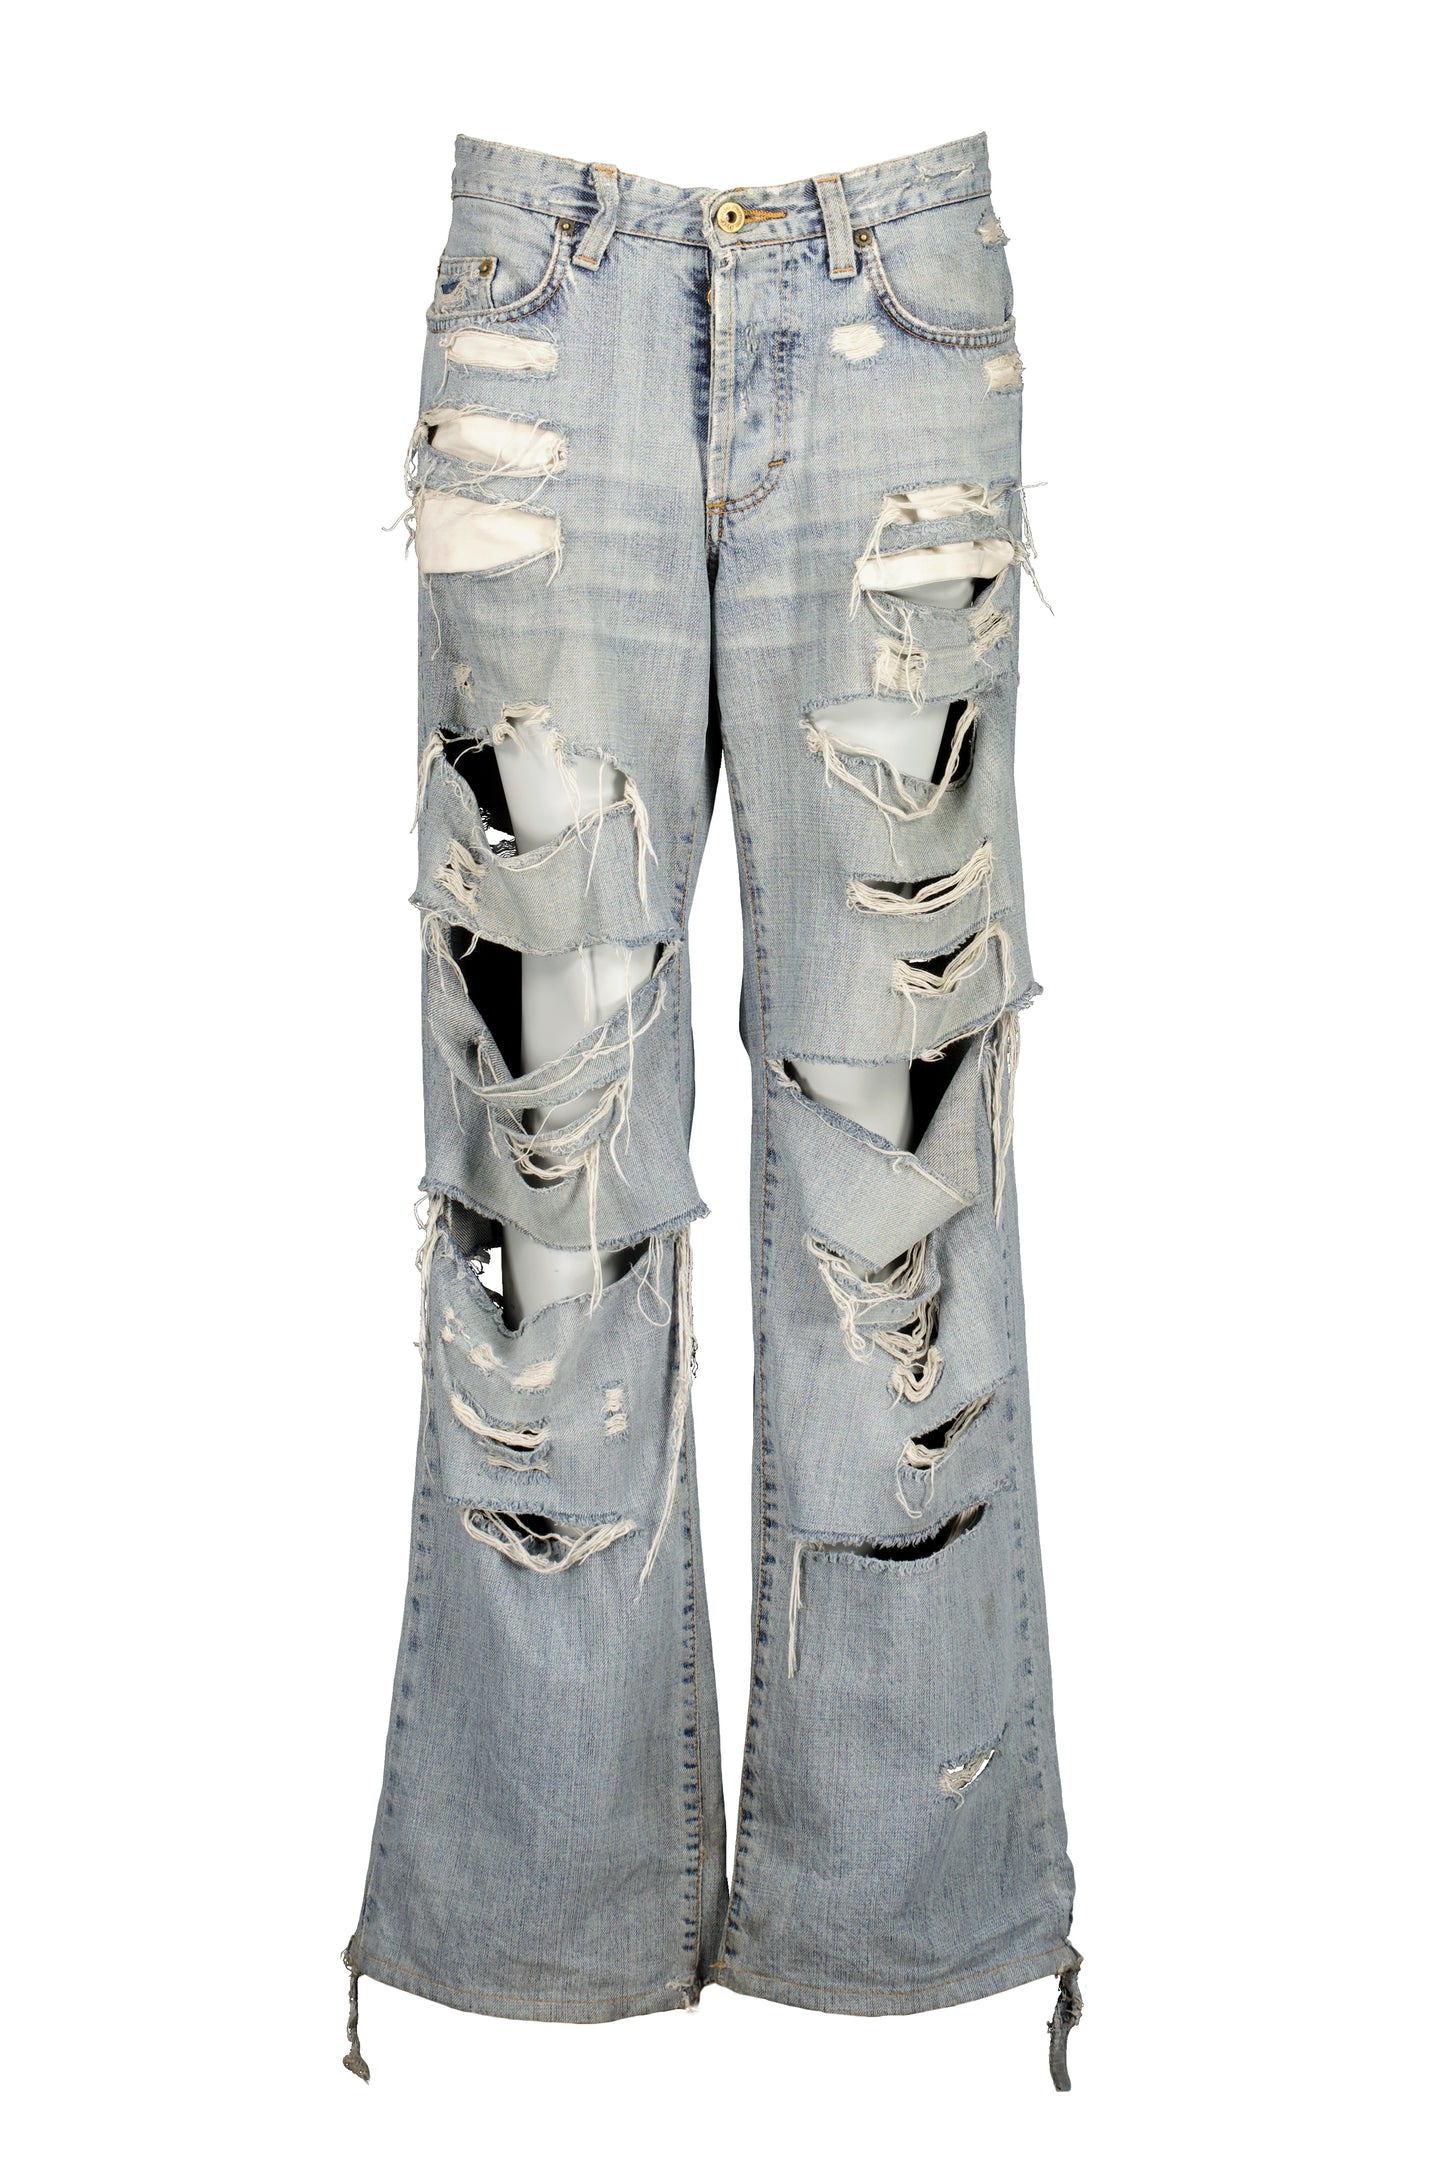 DOLCE AND GABBANA SS03 SLASHED JEANS